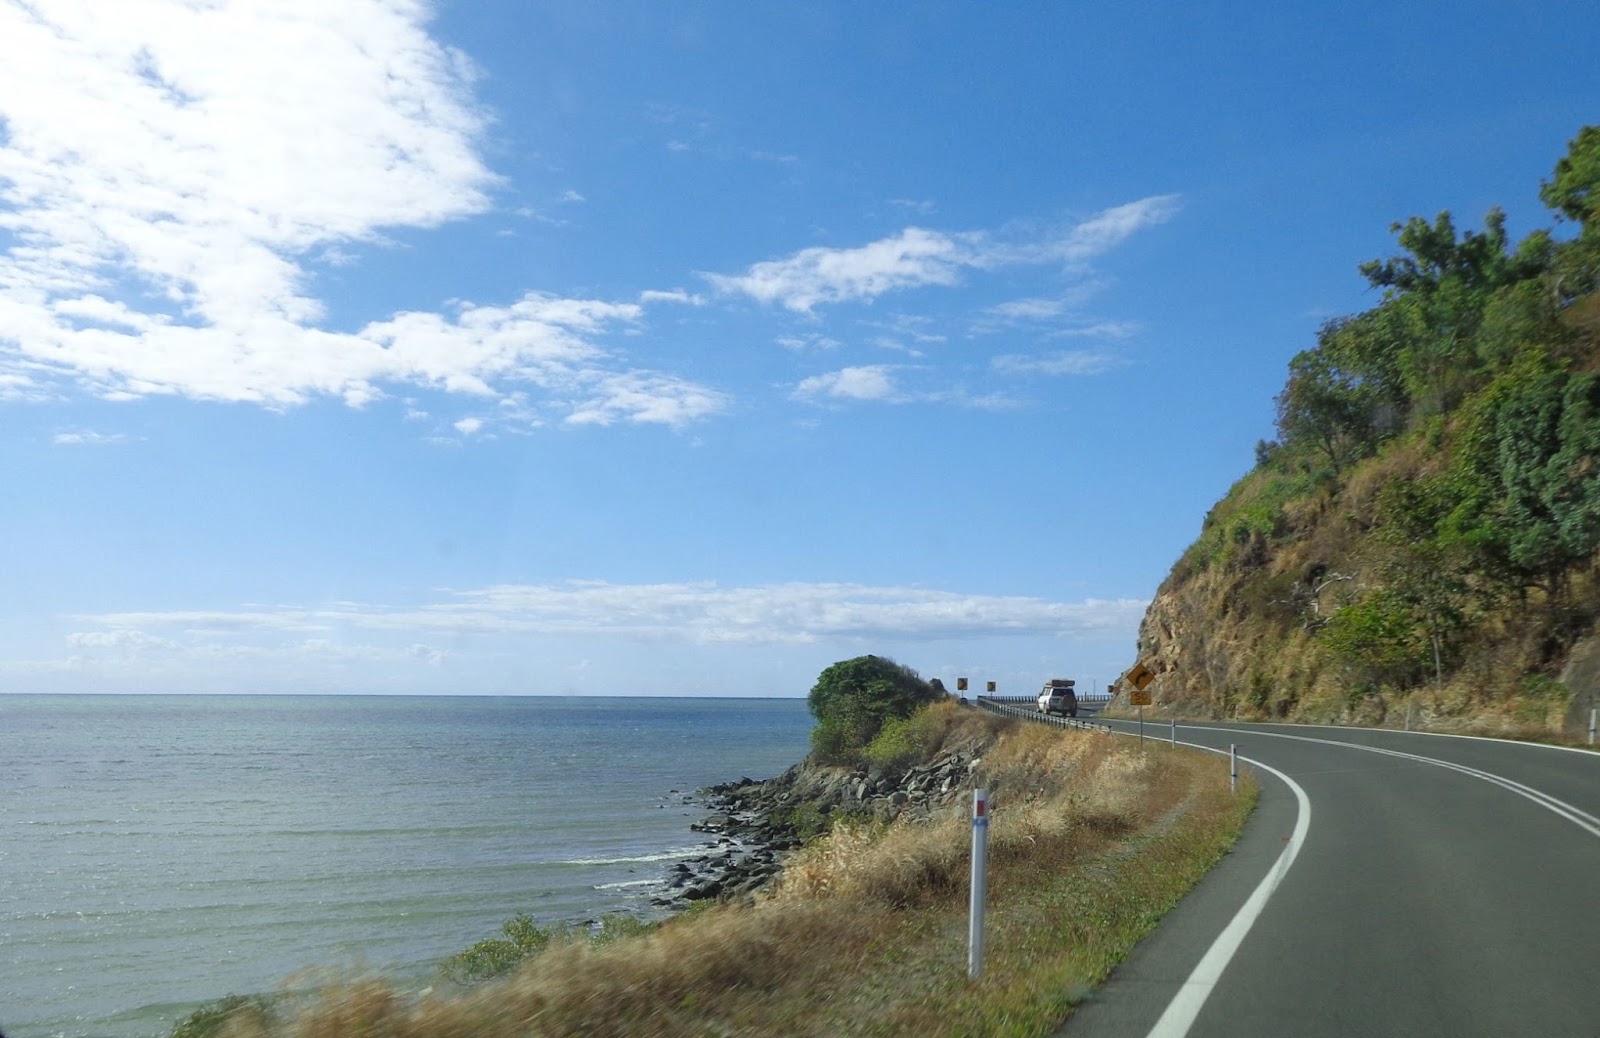 Along the Captain Cook Highway. (Photo via Flickr)